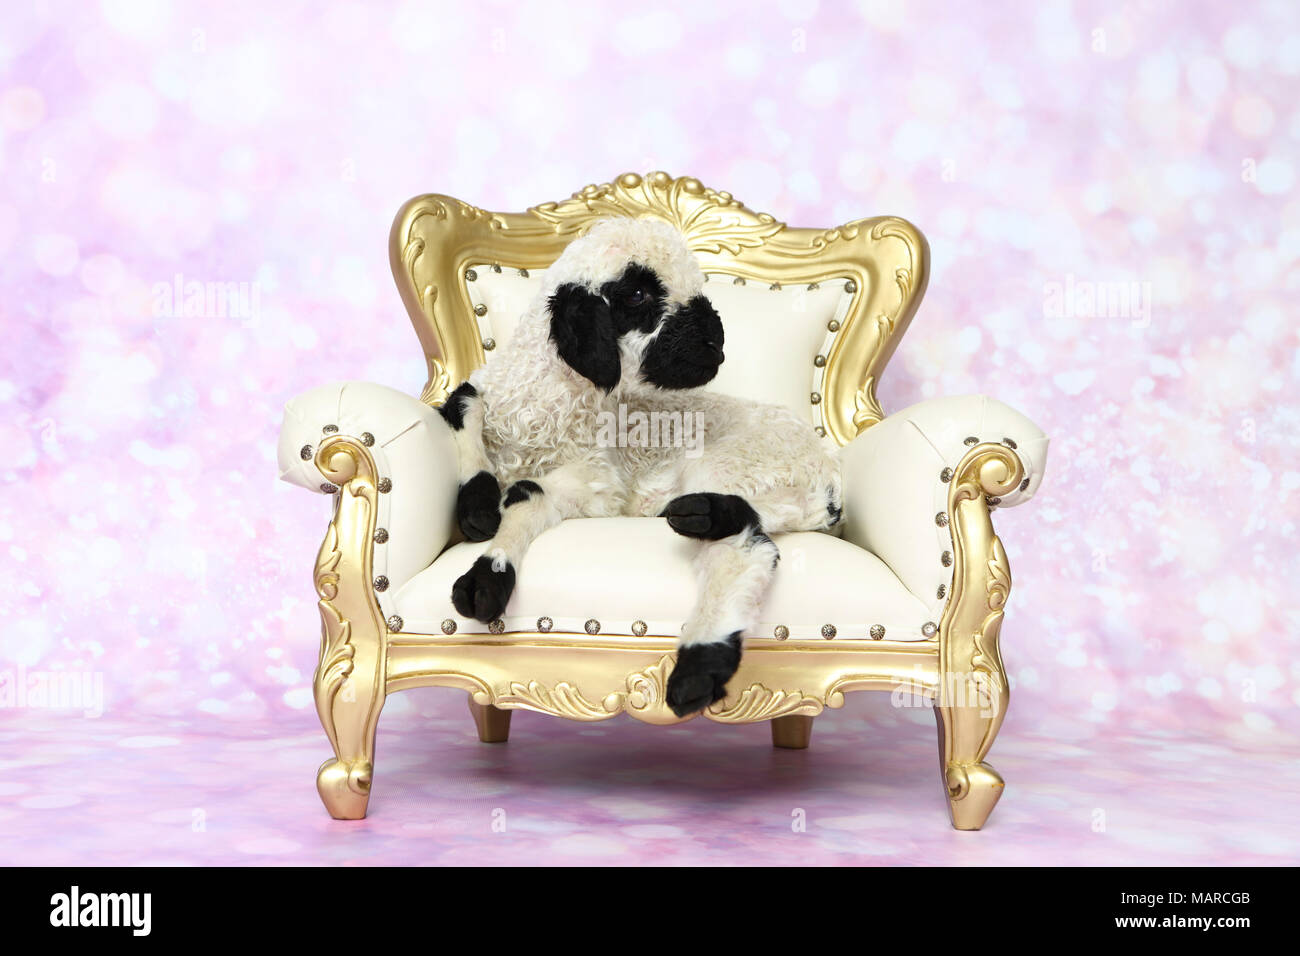 Valais Blacknose Sheep. Lamb (5 days old) lying on a baroque armchair. Studio picture against a pink background. Germany Stock Photo